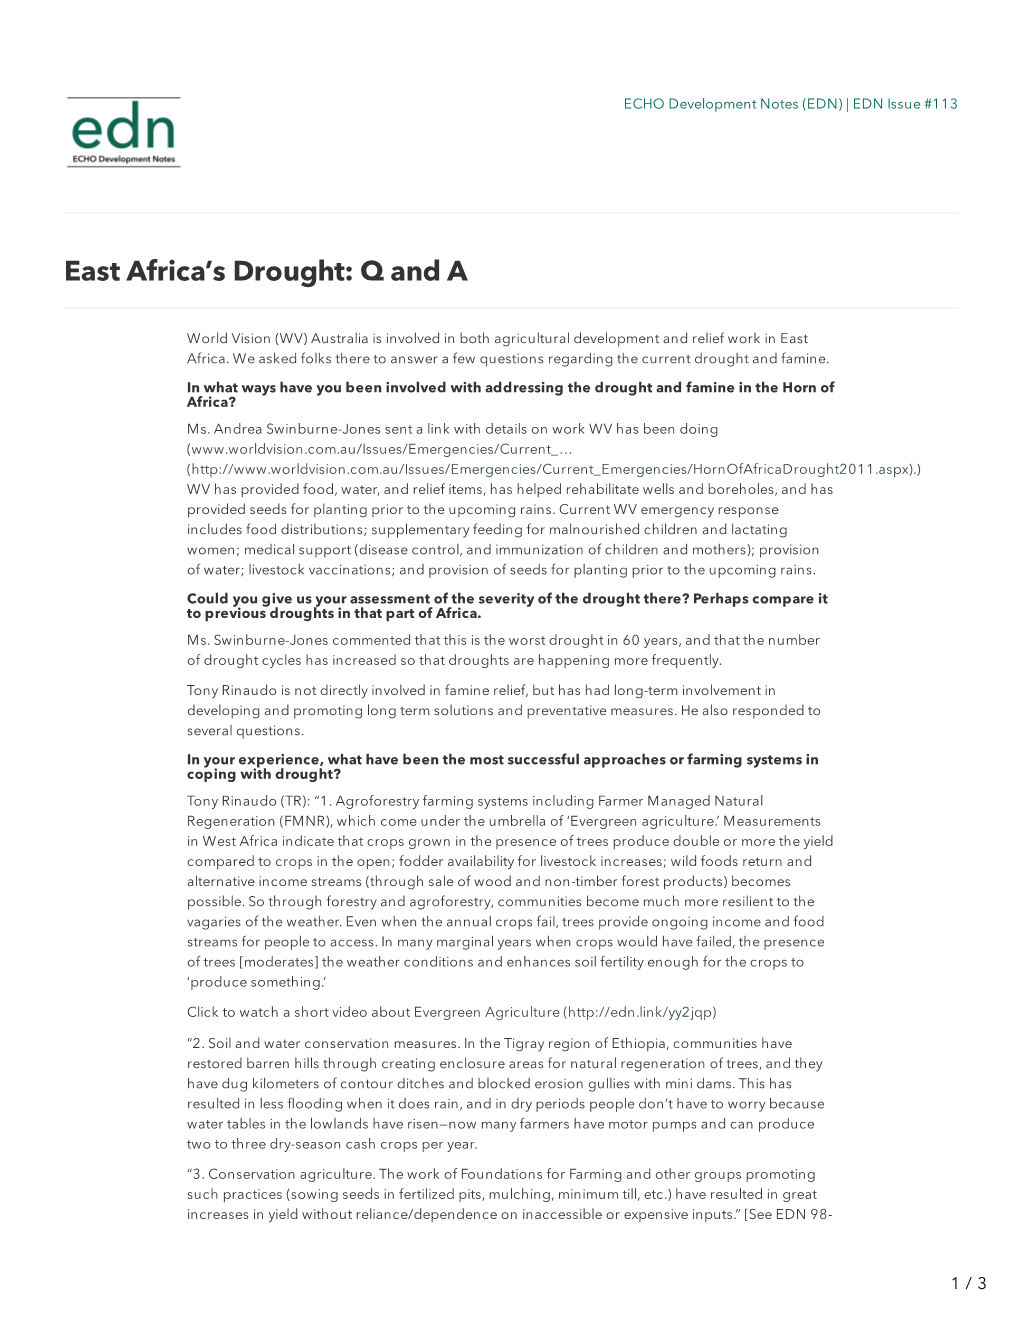 East Africa's Drought: Q and A